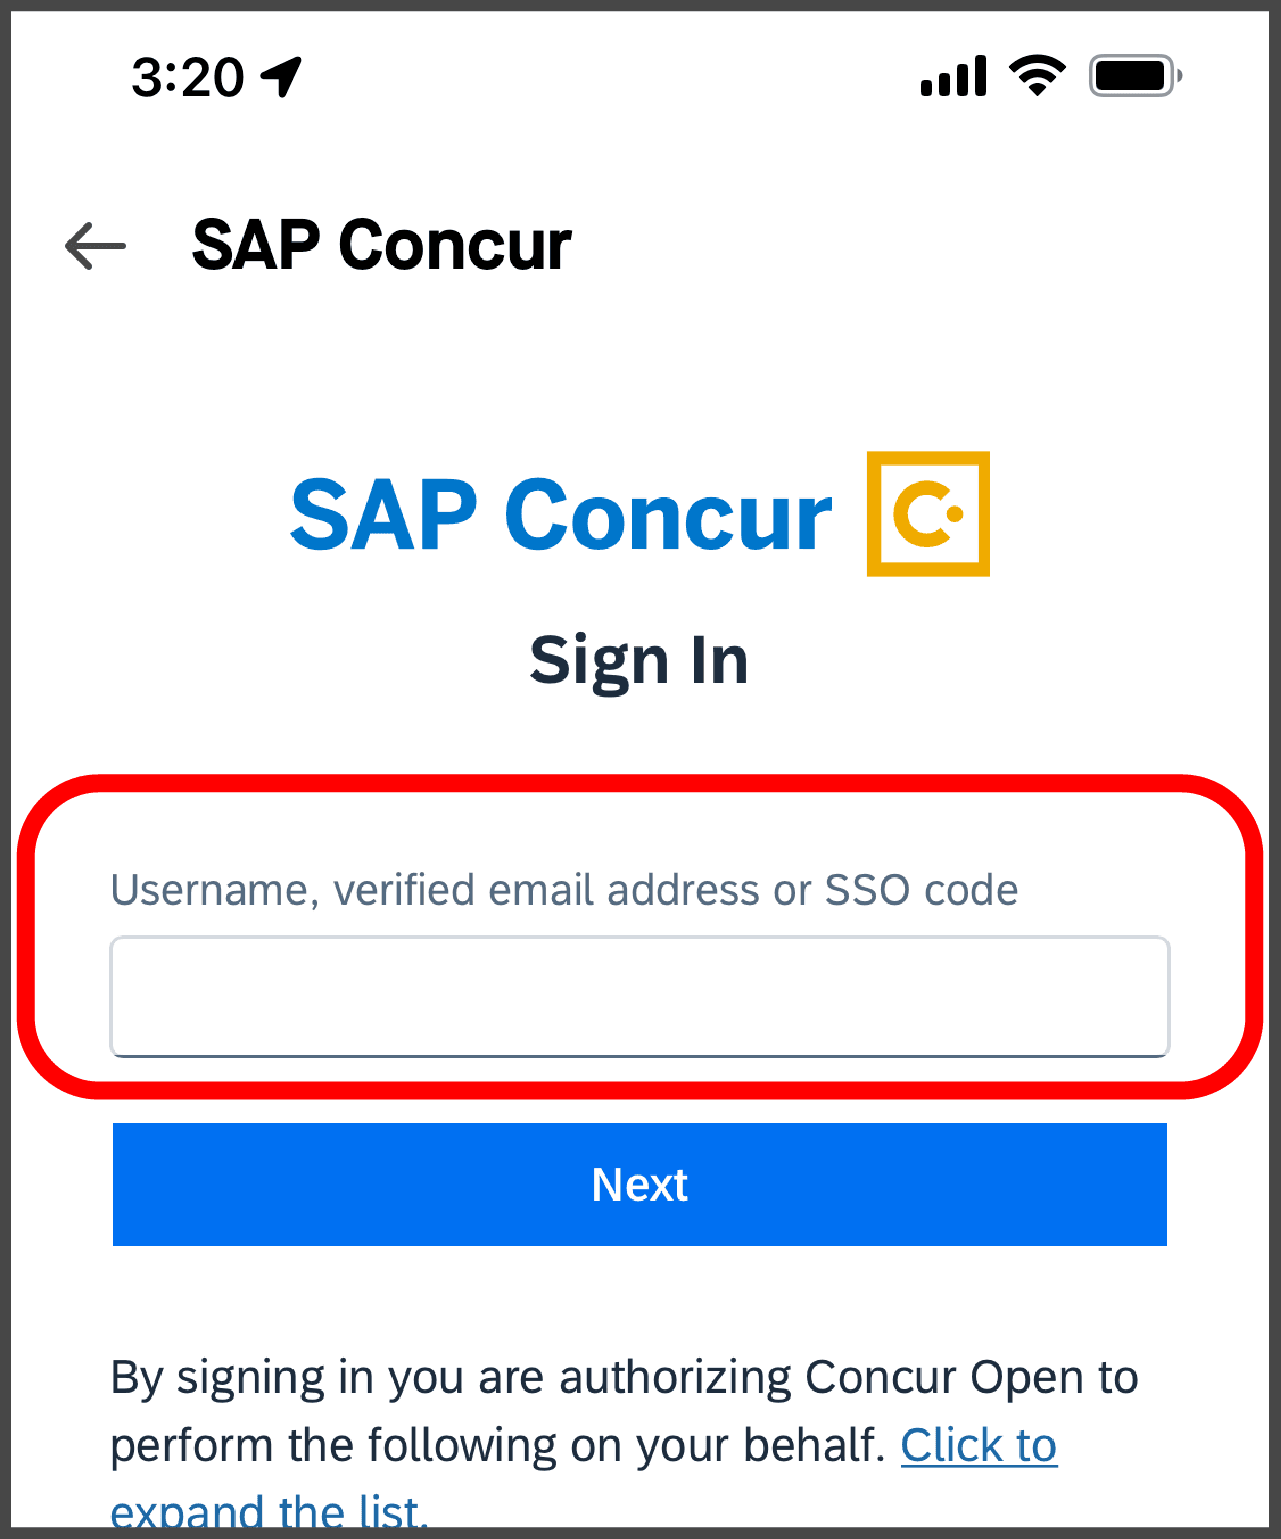 5.Log in with your SAP Concur details@2x.png